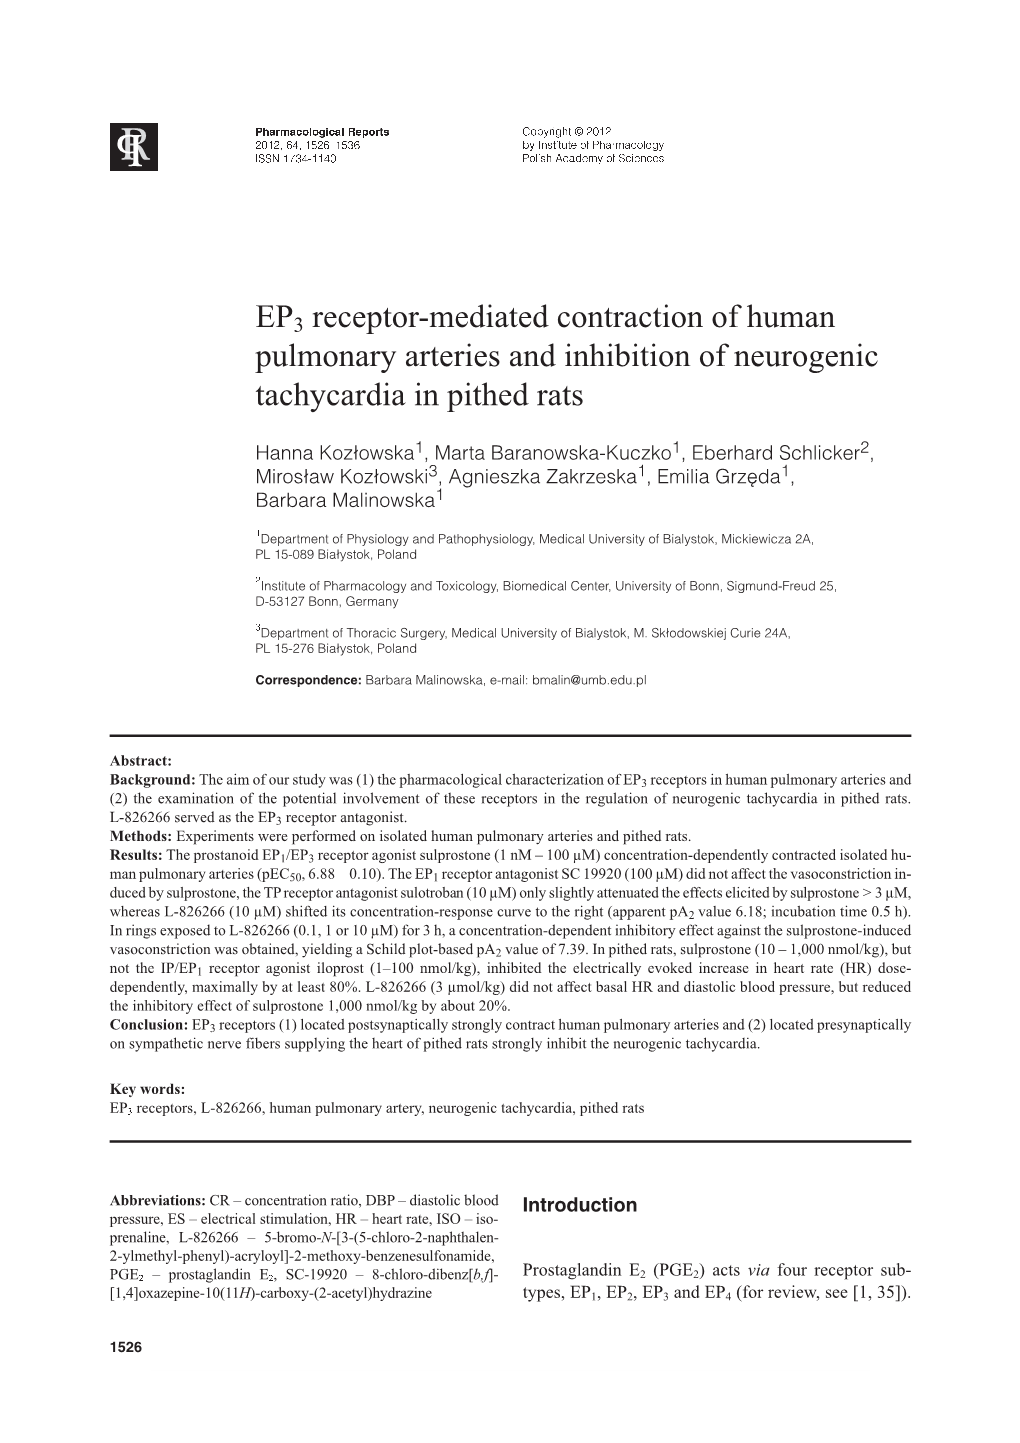 EP3 Receptor-Mediated Contraction of Human Pulmonary Arteries And